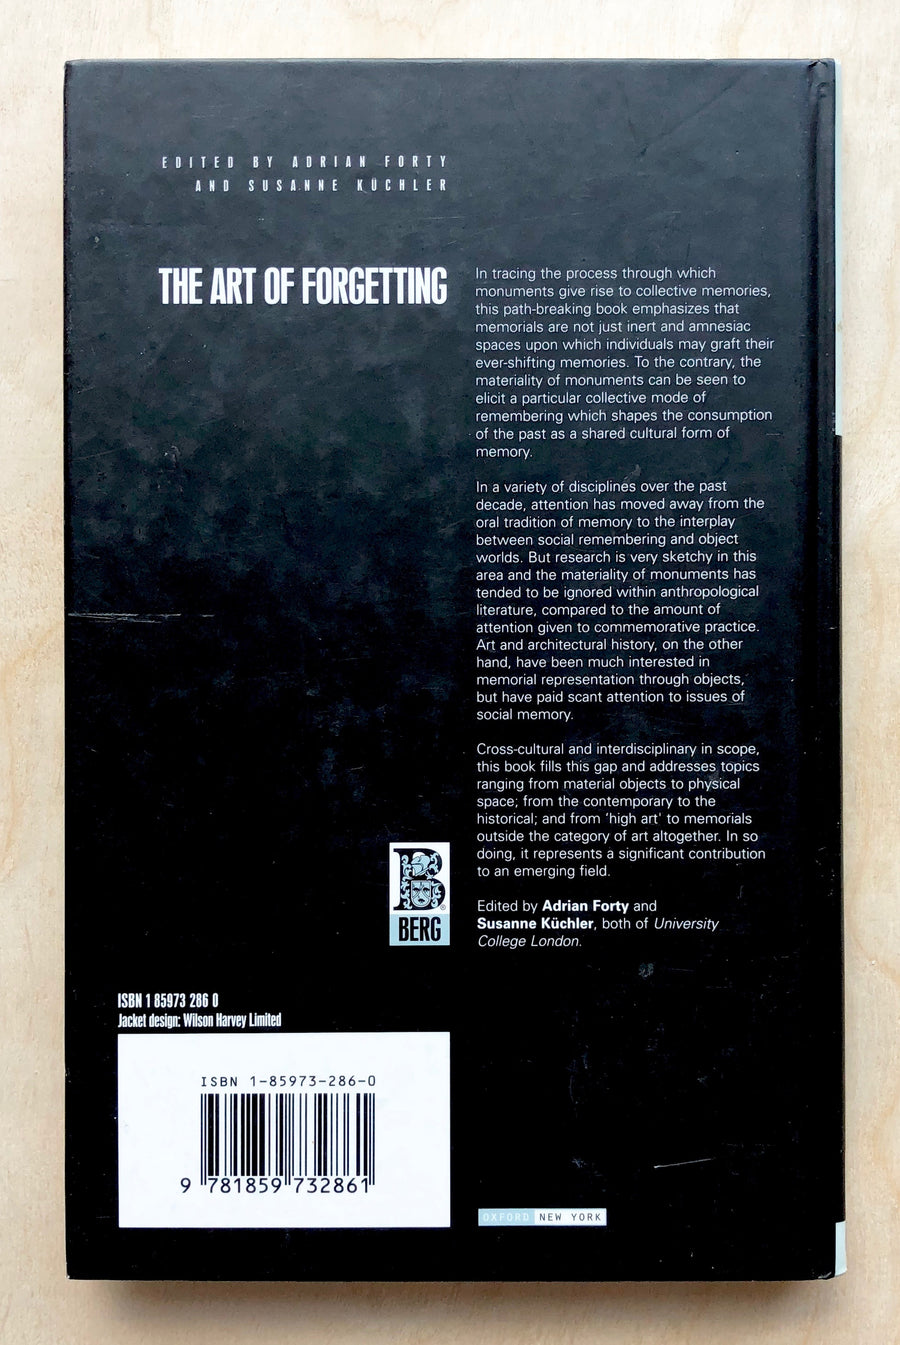 THE ART OF FORGETTING (MATERIALIZING CULTURE) edited by Adrian Forty and Susanne Küchler